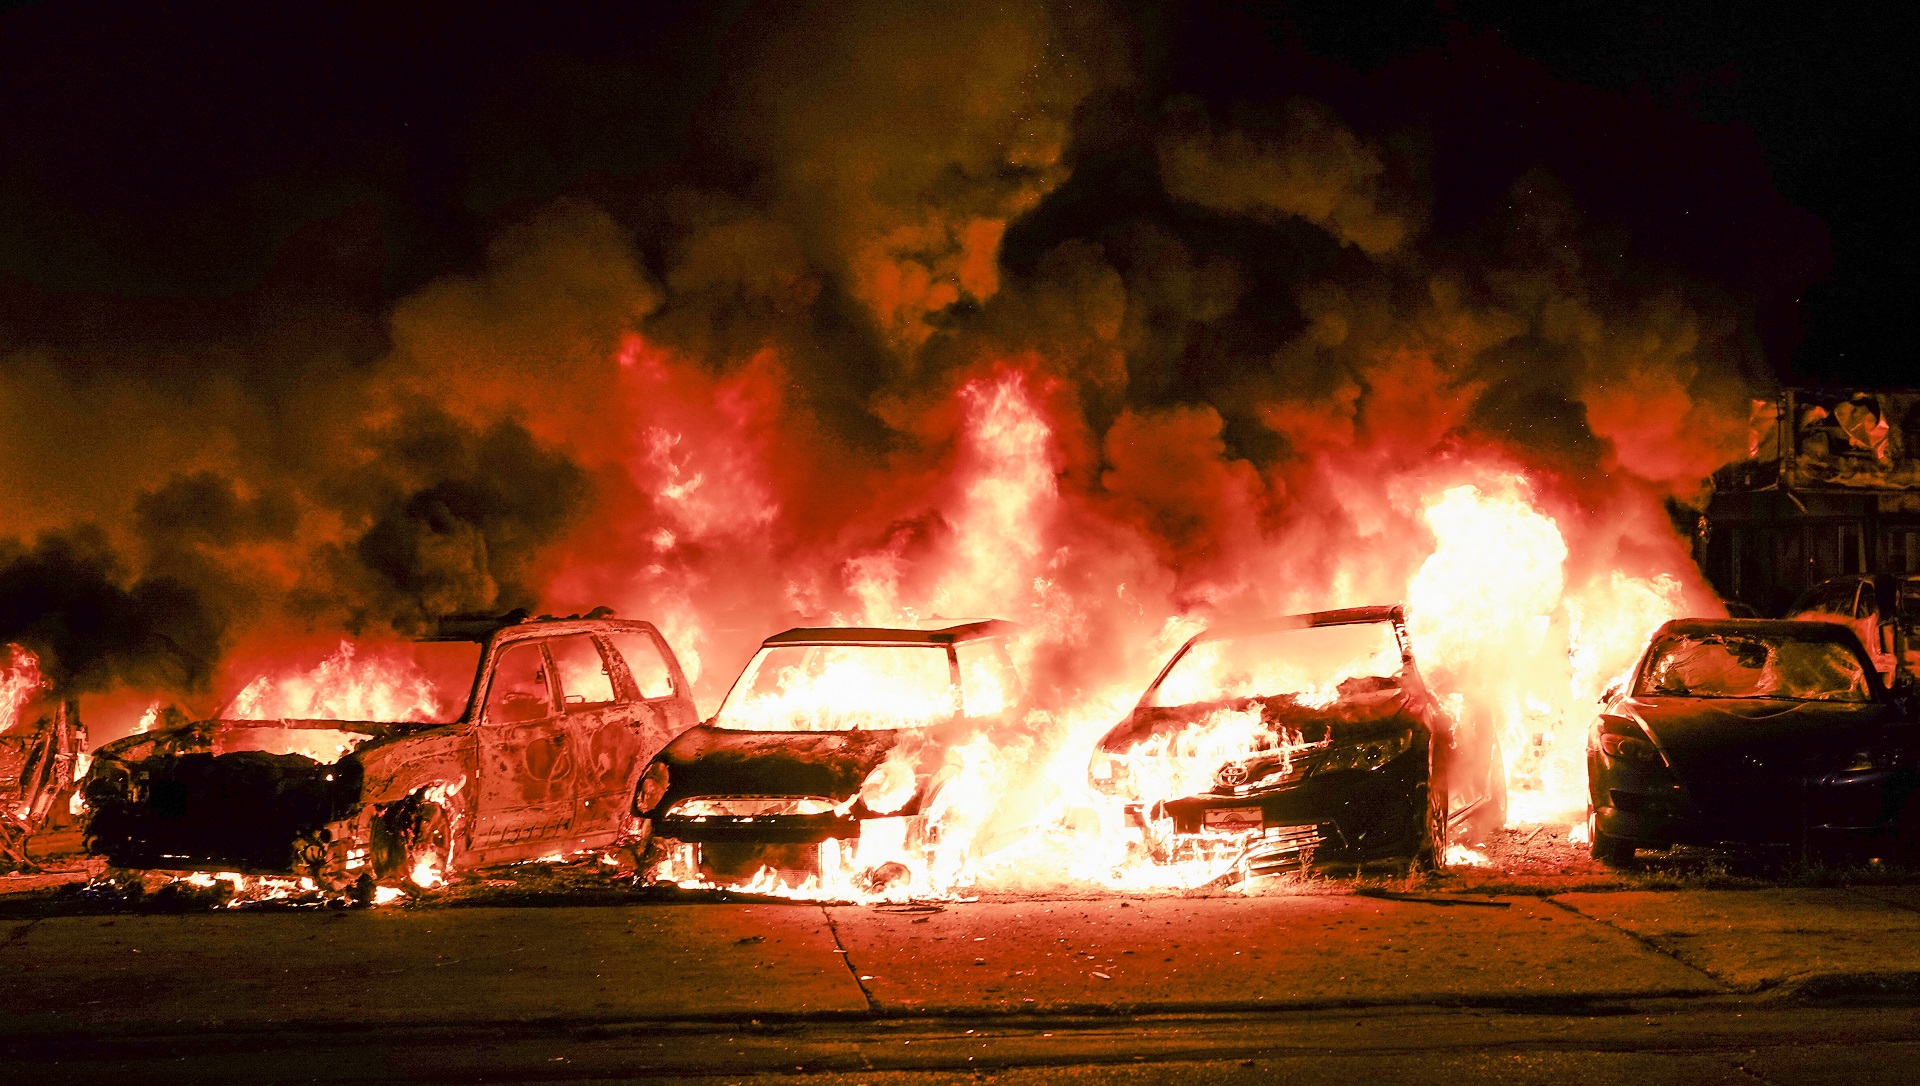 epa08623796 Automobiles burn after being set ablaze during a second night of unrest in the wake of the shooting of Jacob Blake by police officers, in Kenosha, Wisconsin, USA, 24 August 2020. According to media reports Jacob Blake, a black man, was shot by a Kenosha police officer or officers responding to a domestic distubance call on 23 August, setting off protests and unrest. Blake was taken by air ambulance to a Milwaukee, Wisconsin hospital and protests started after a video of the incident was posted on social media.  EPA/TANNEN MAURY